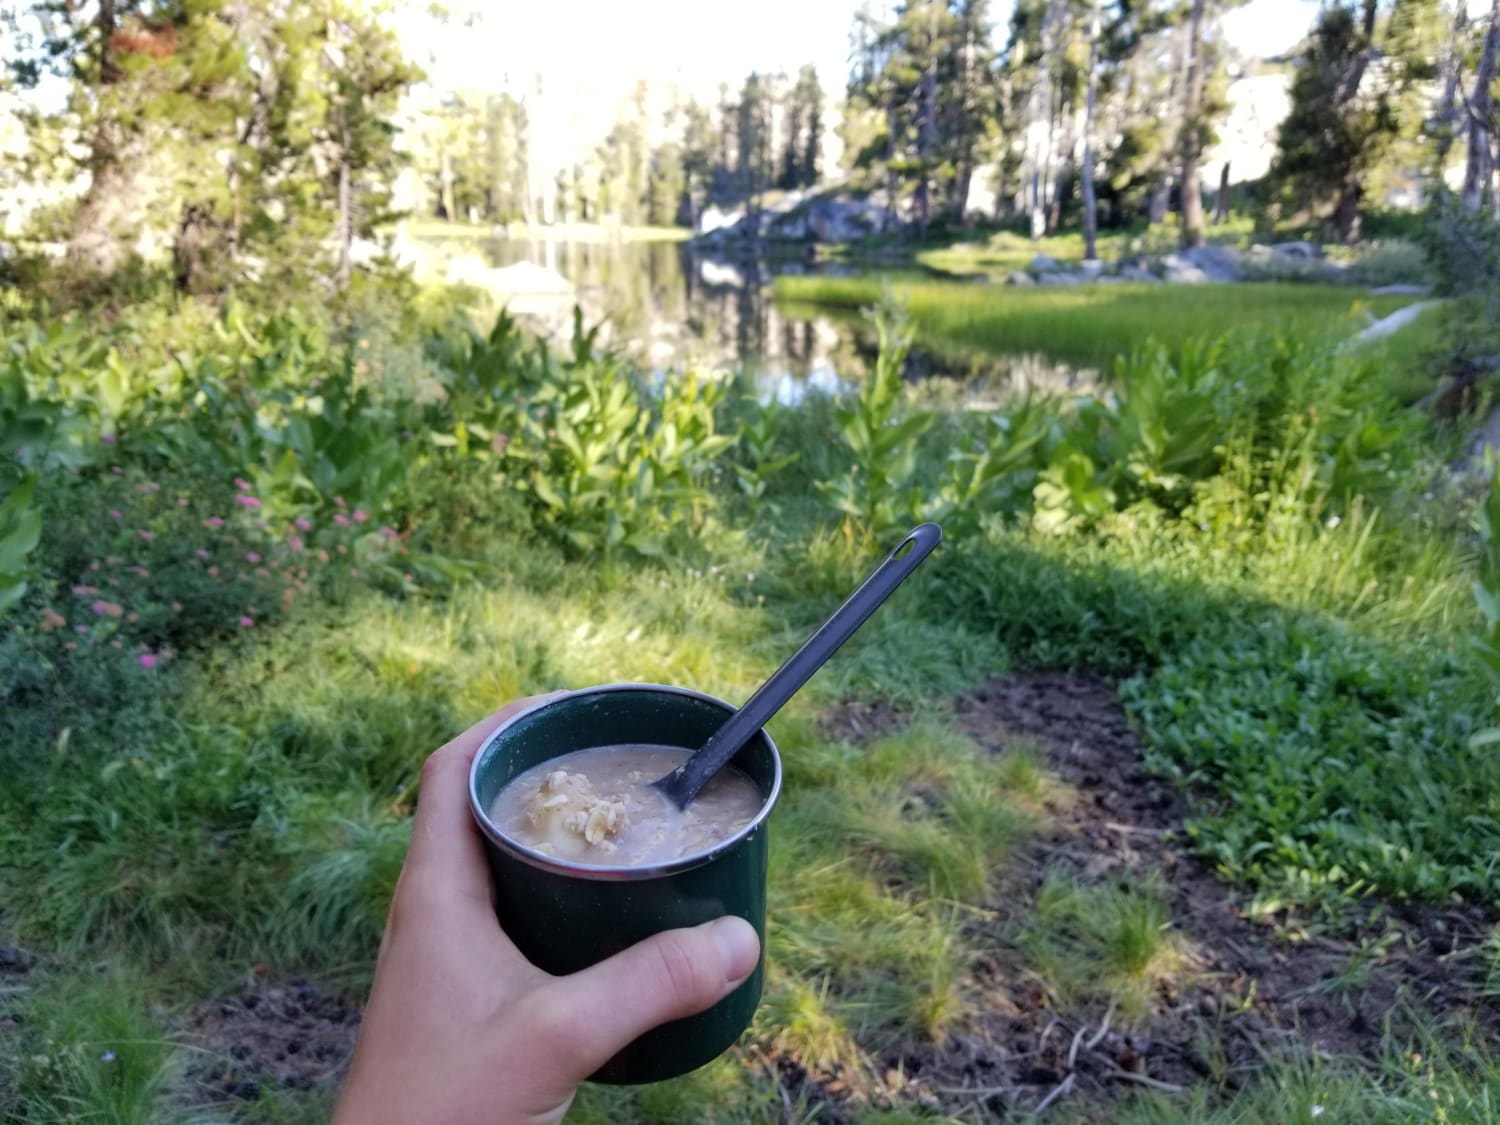 Sharing my fast oatmeal with some mosquitoes